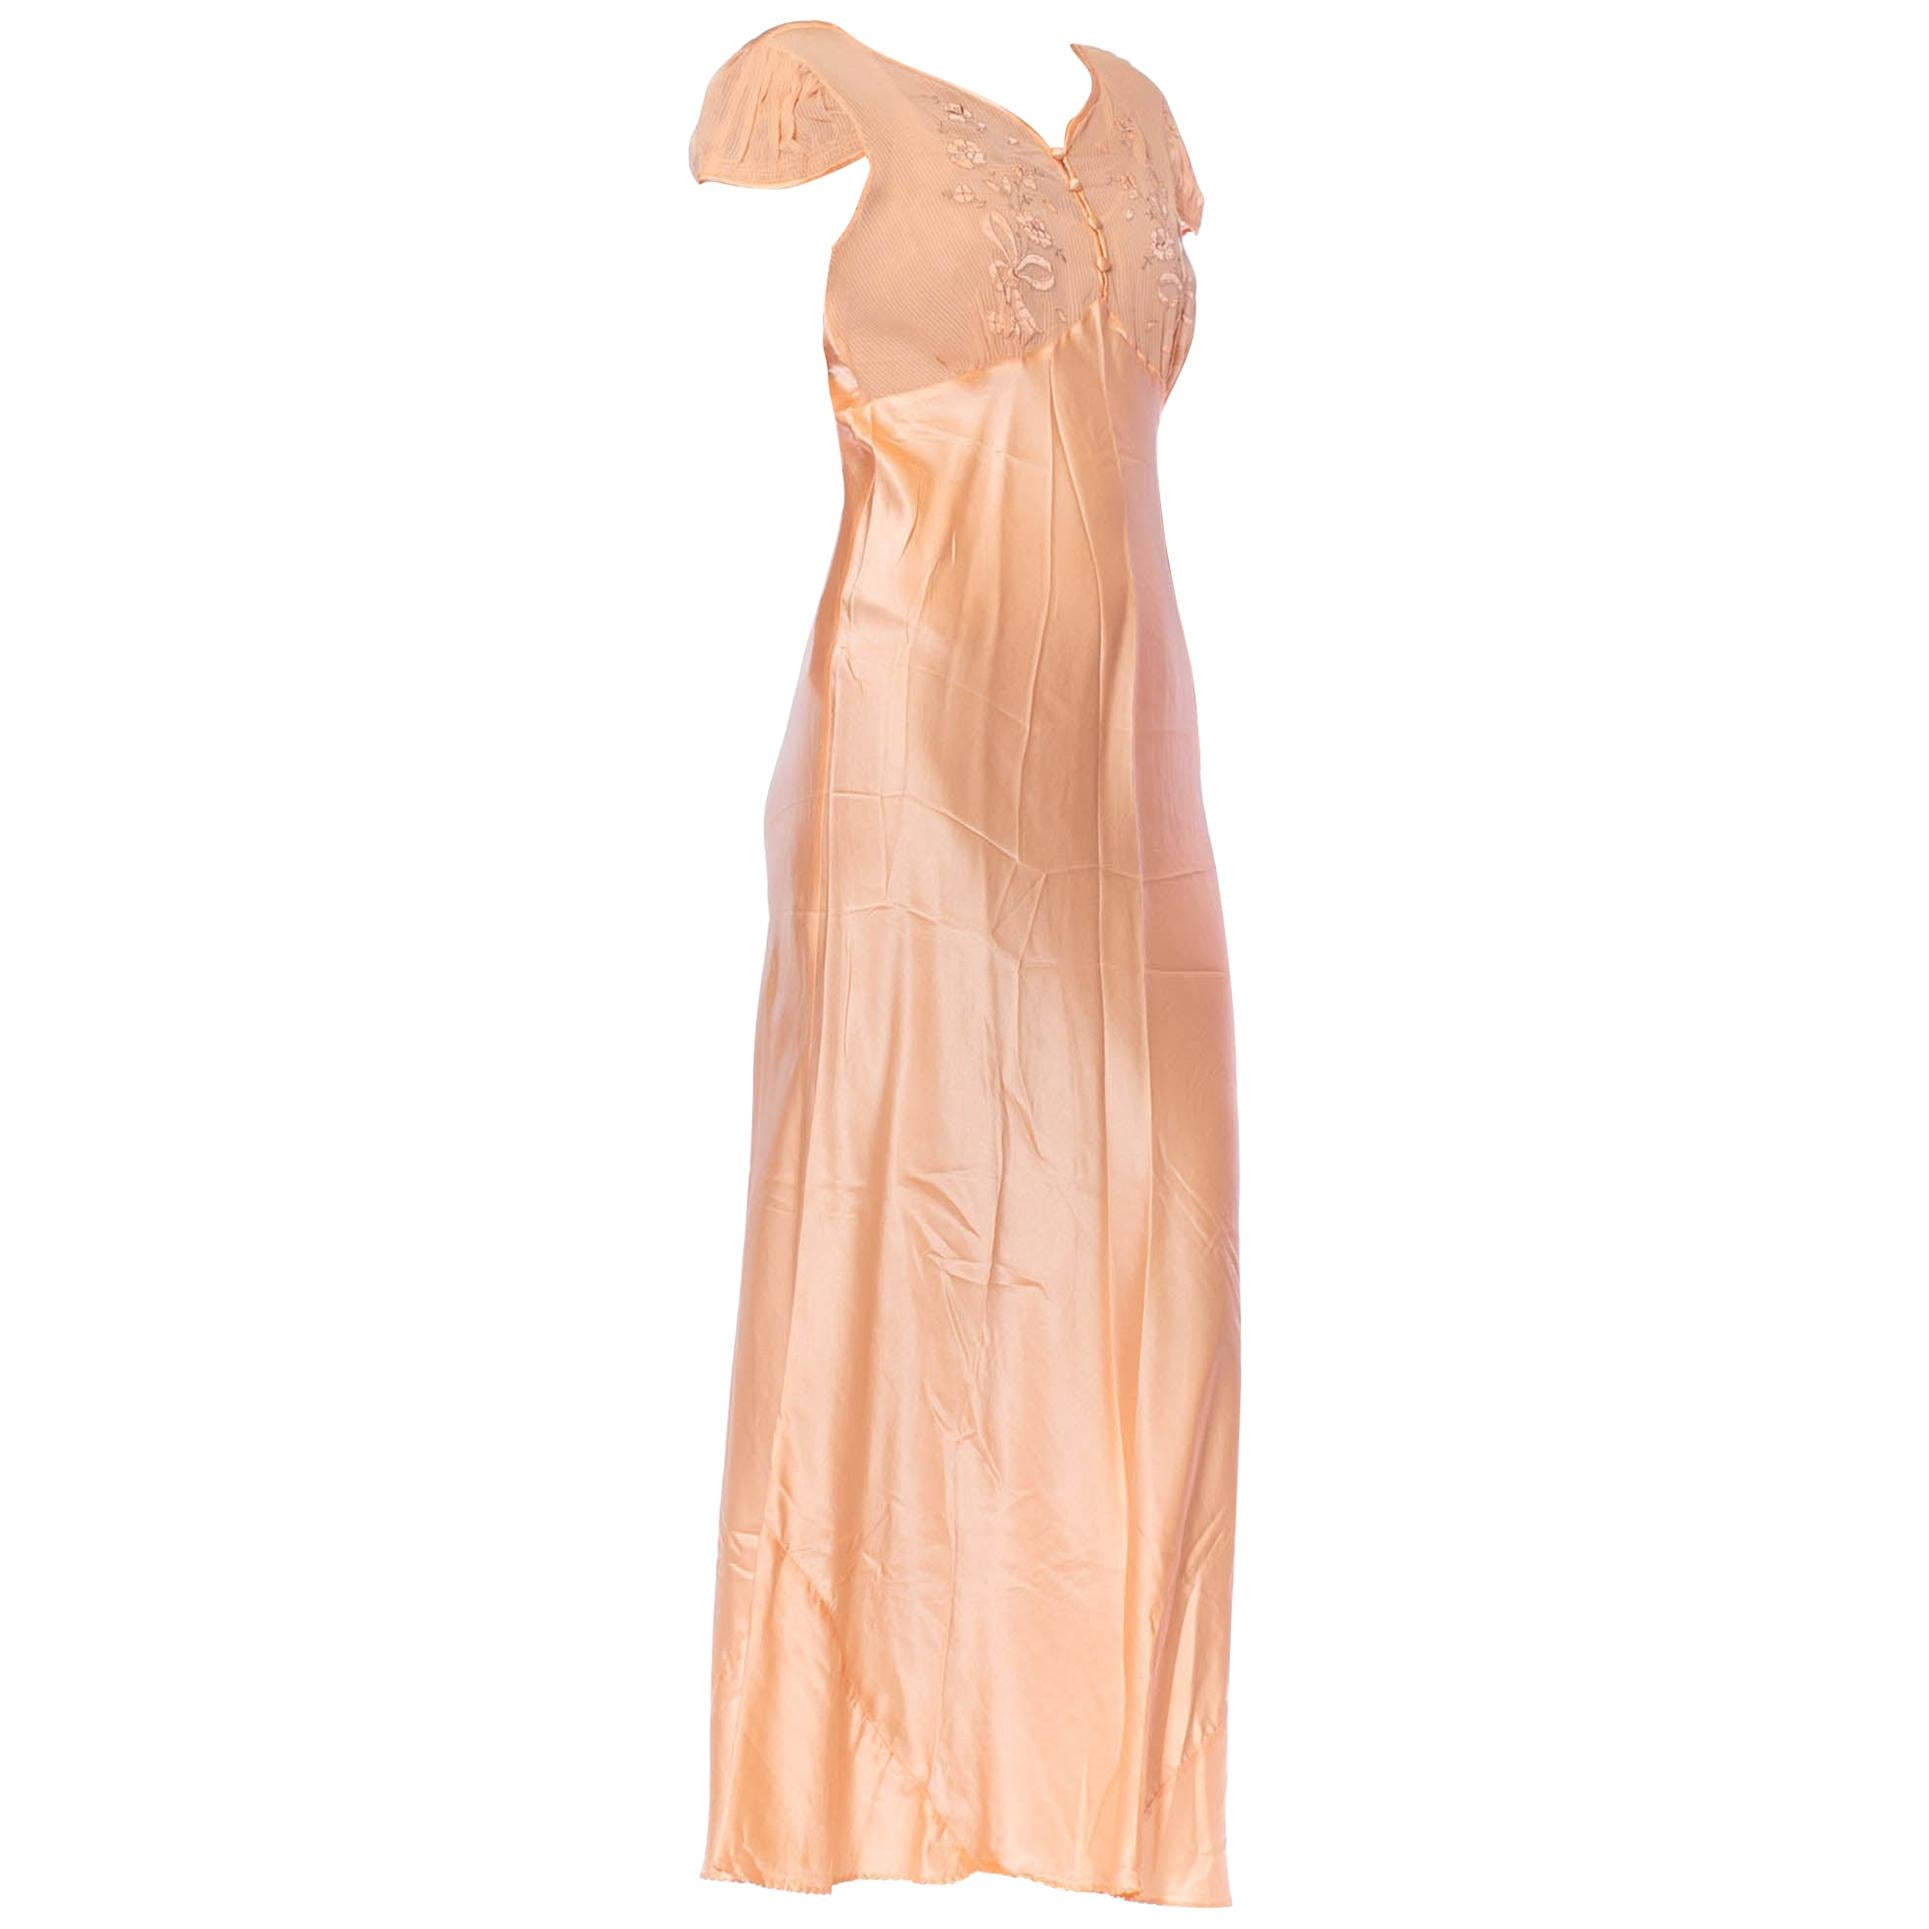 1930S Blush Pink Bias Cut Silk Charmeuse Slip DressNegligee With Sheer Embroid